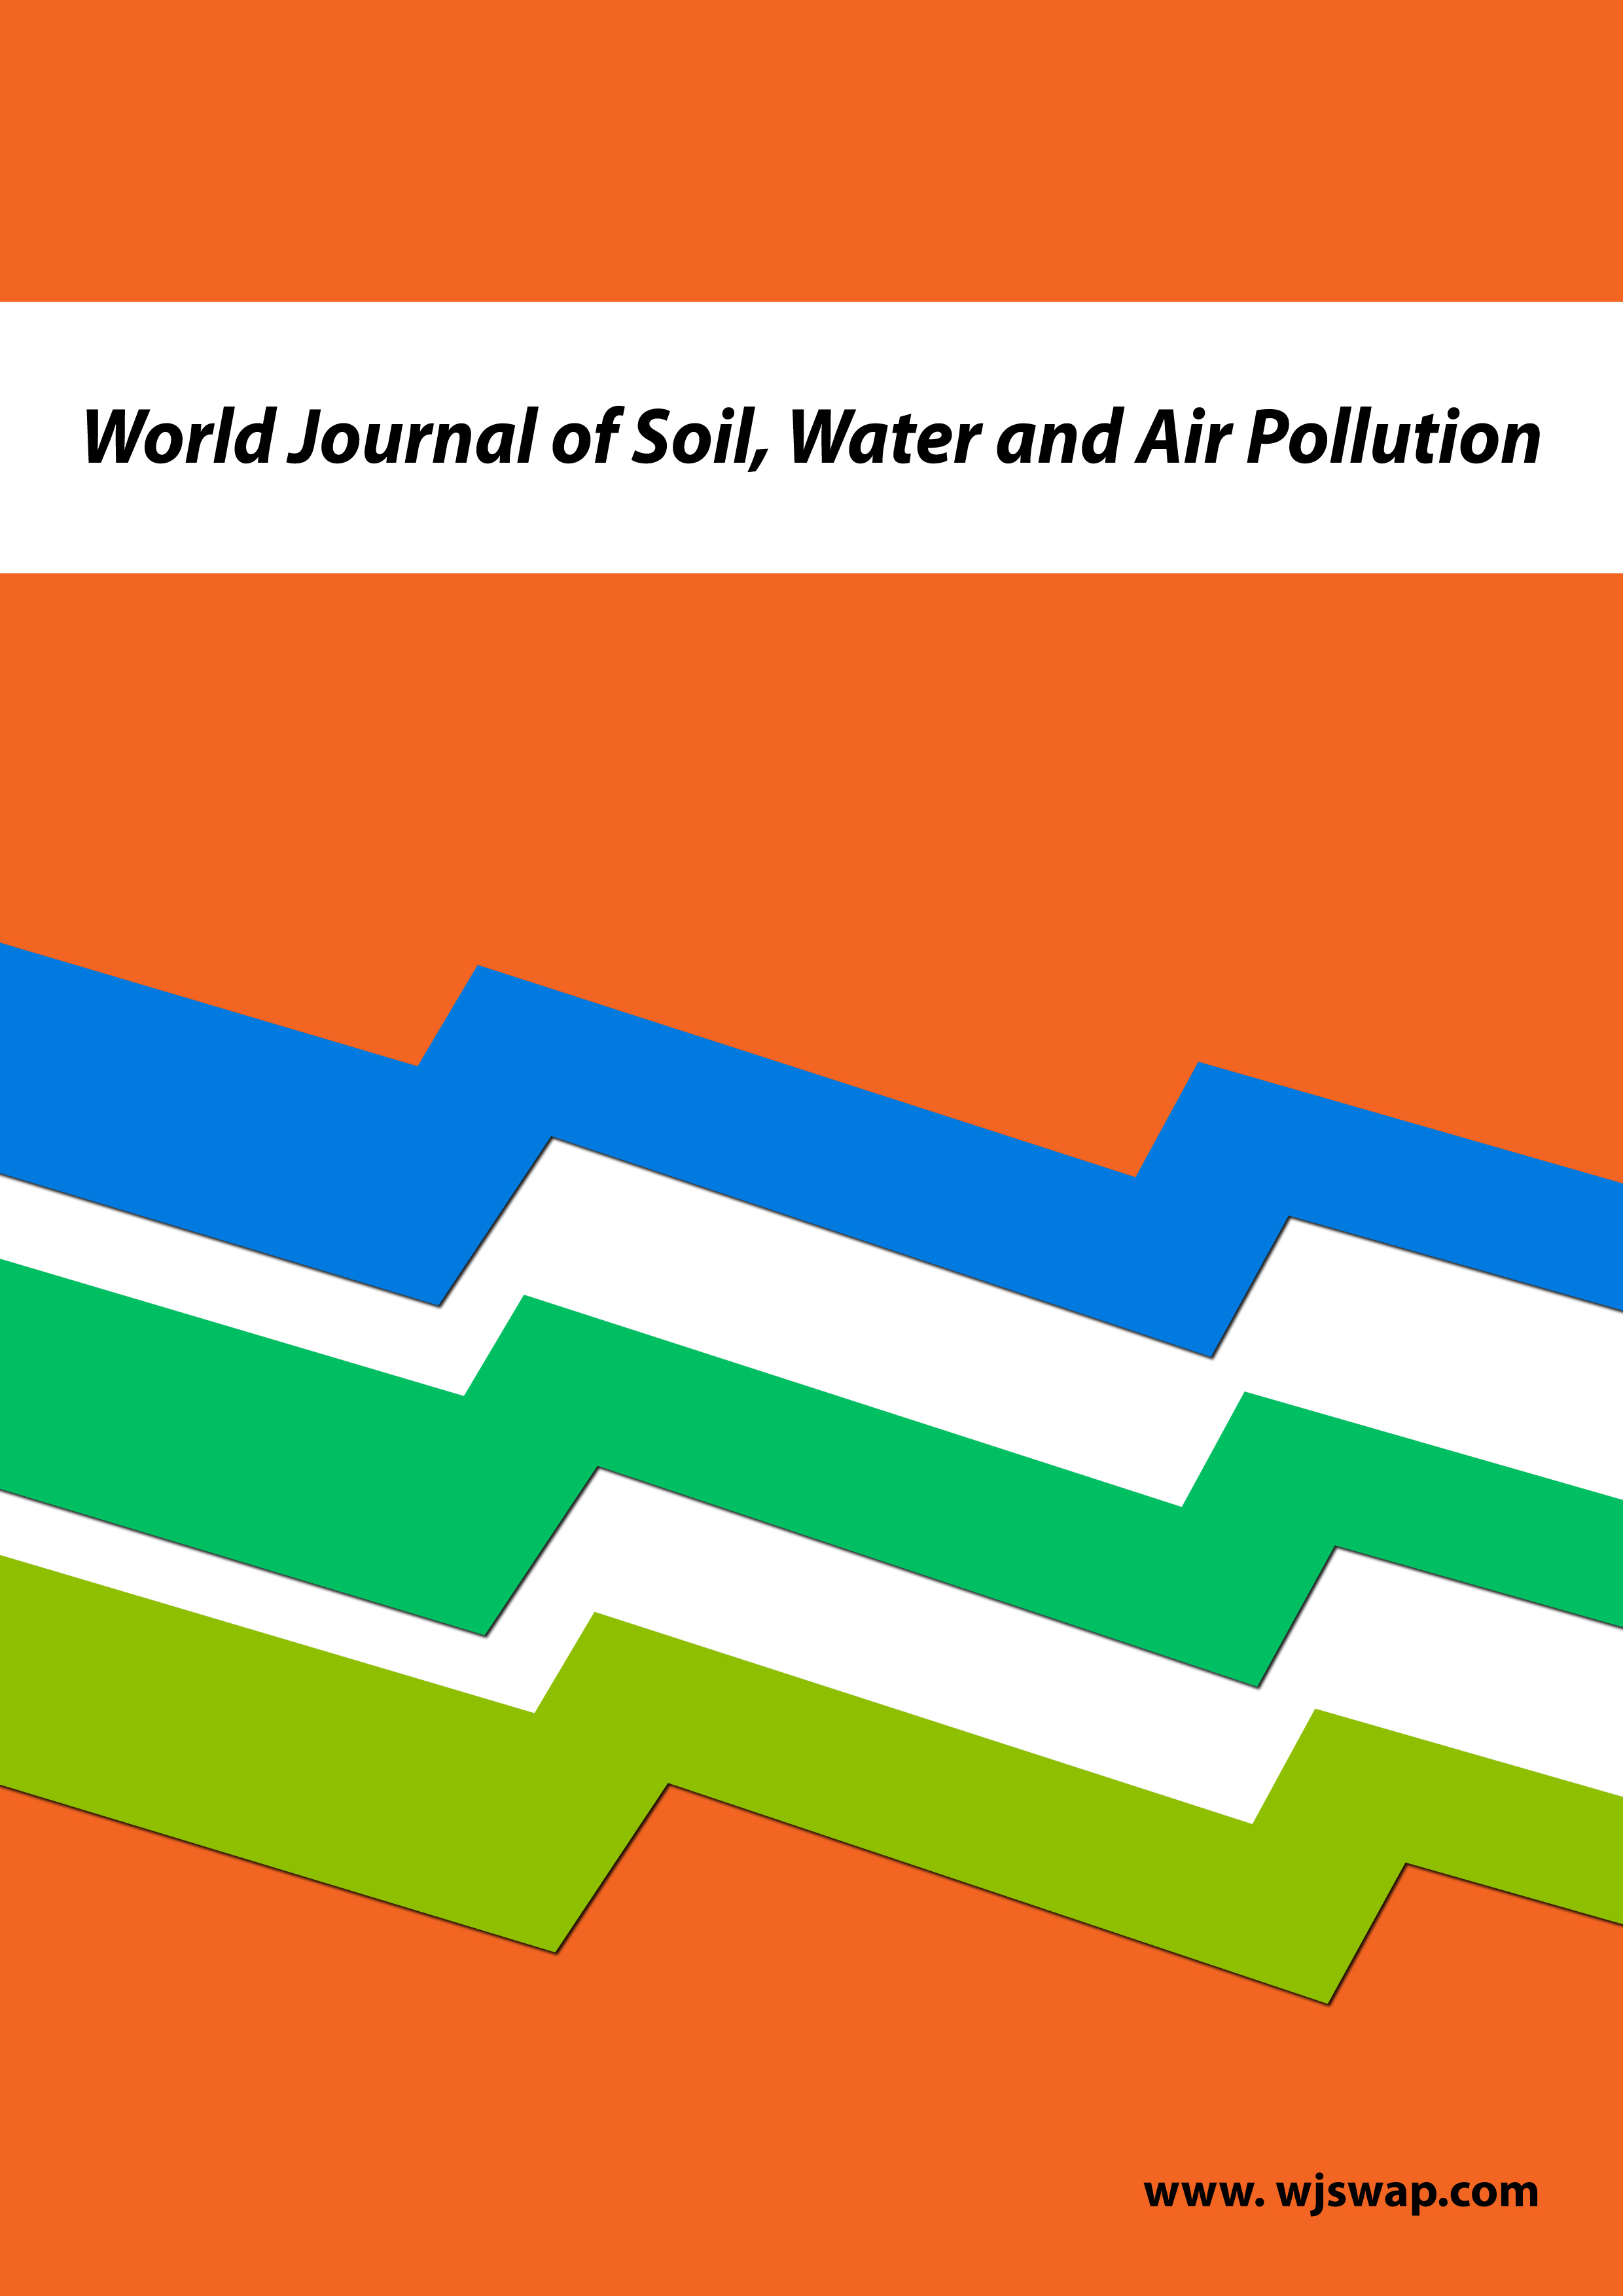 World Journal of Soil, Water and Air Pollution